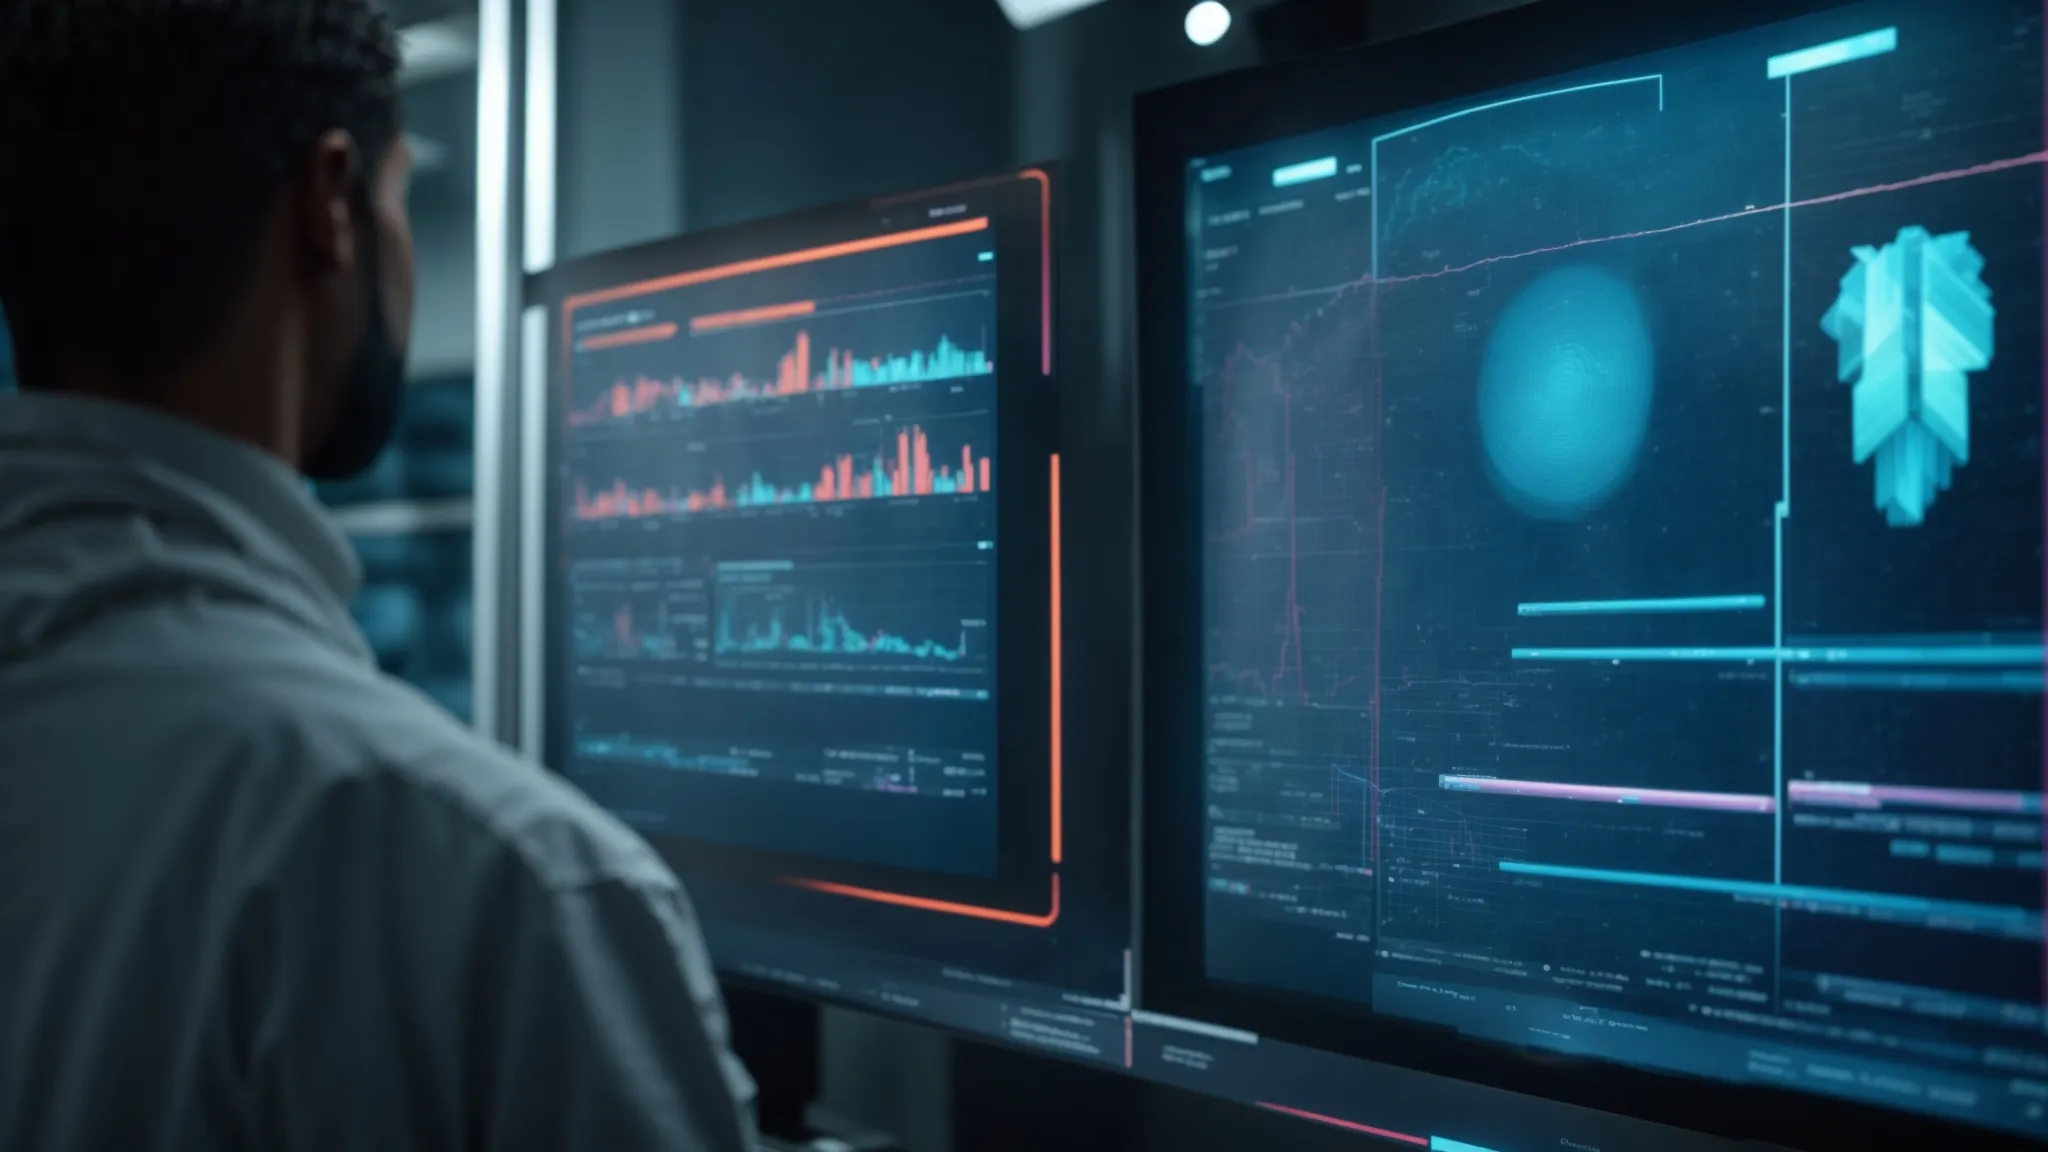 a futuristic doctor interacts with a holographic display of health analytics and patient data.